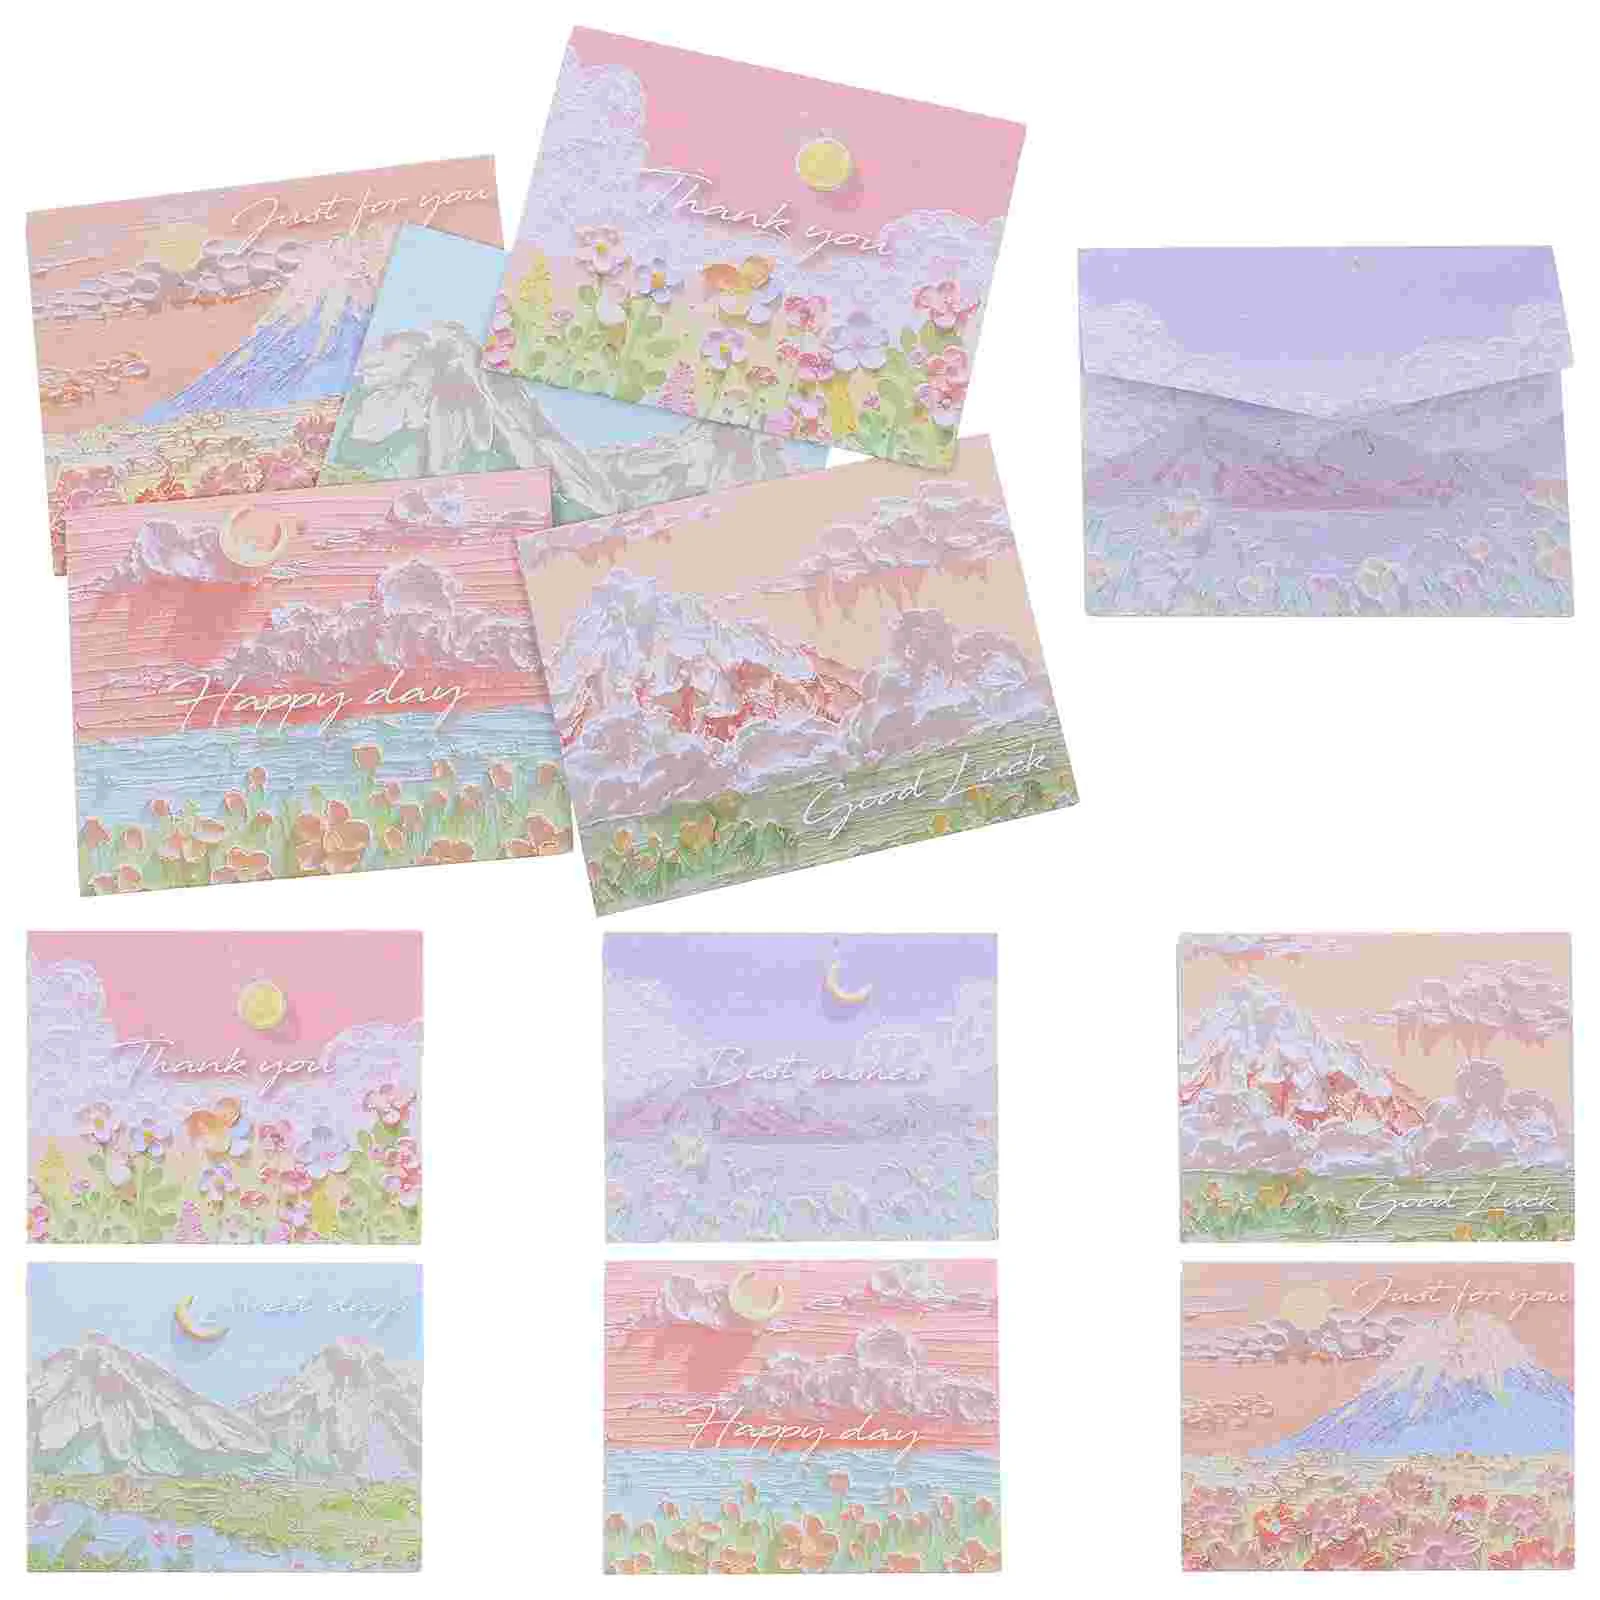 

12 Pcs Cream Blessing Festival Card Bulk Greeting Cards Party Paper Message Decorative